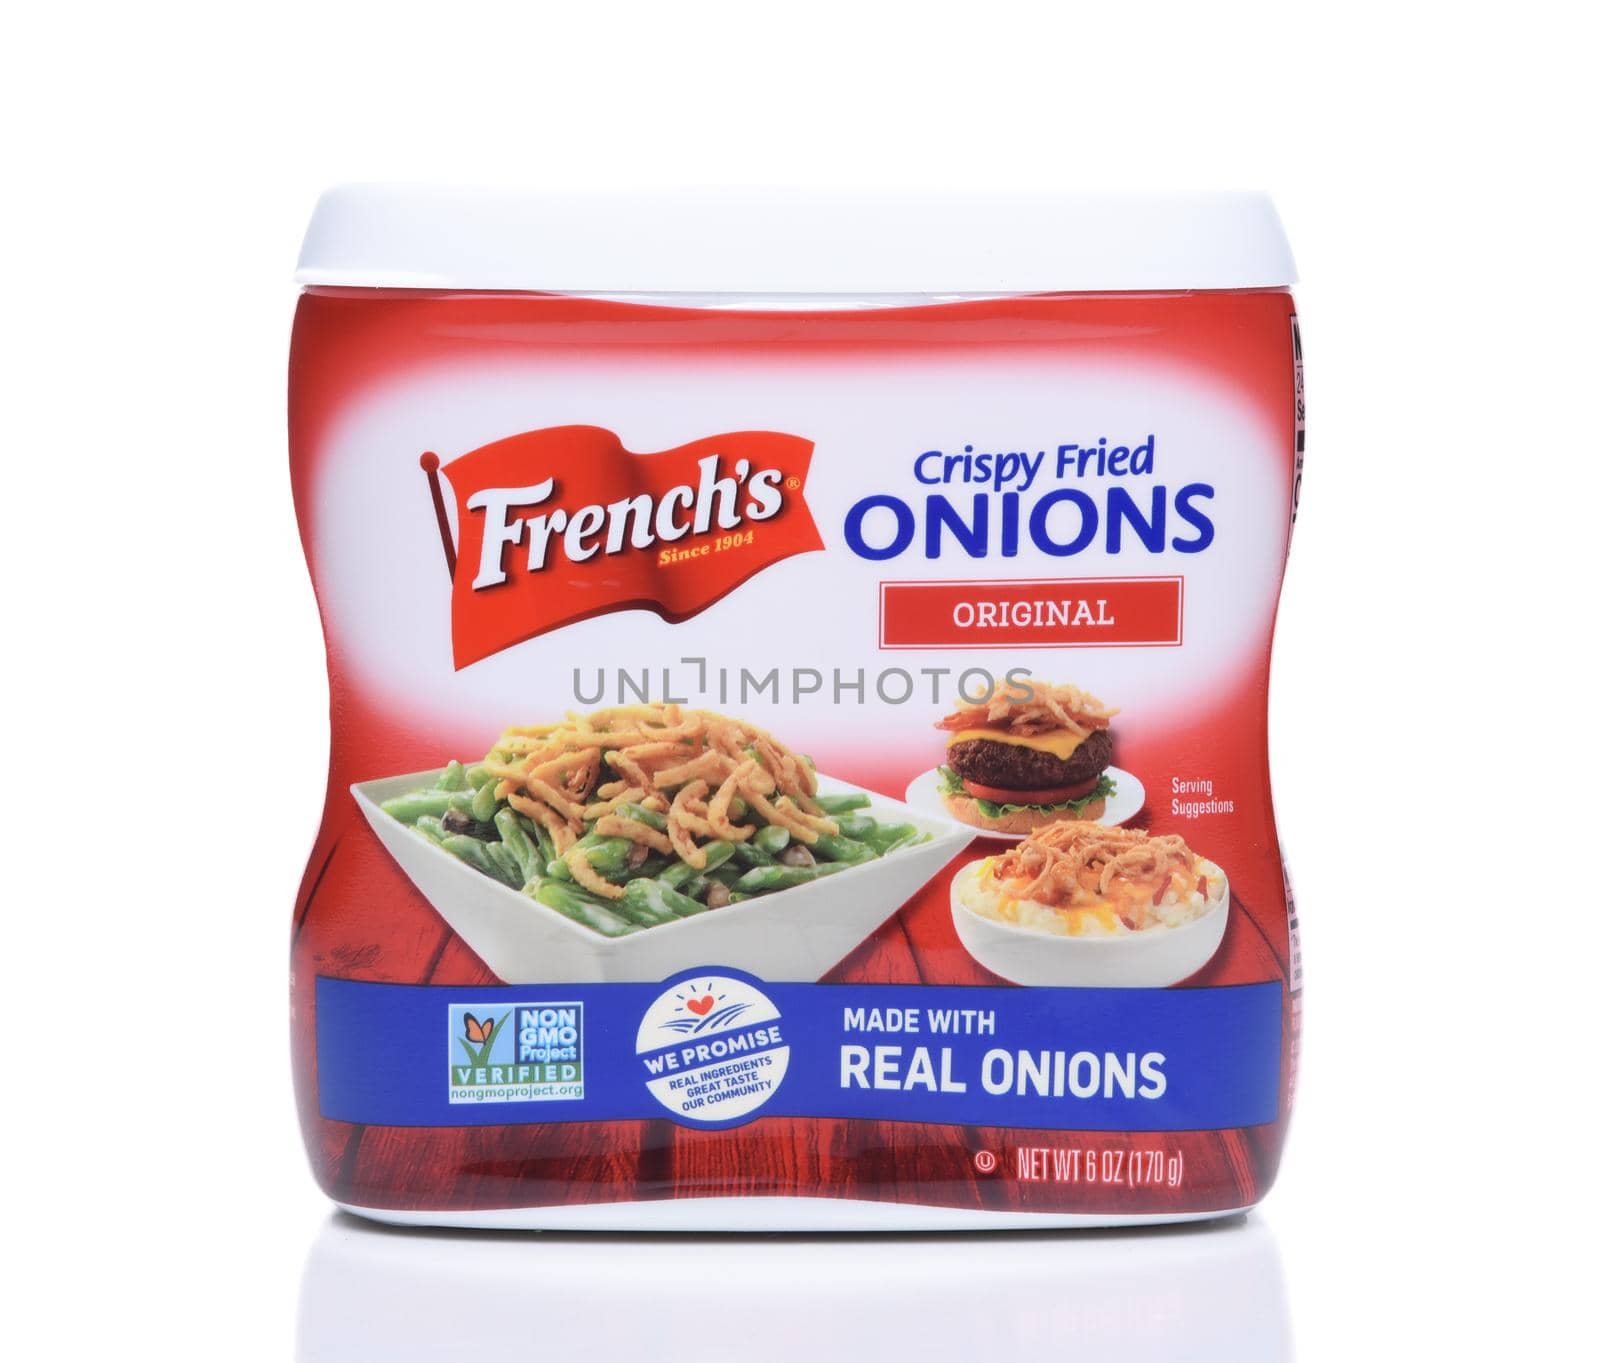 IRVINE, CALIFORNIA - DEC 4, 2018: Frenchs Crispy Fried Onions. The topping is popular in casseroles, salads, burgers and soups.